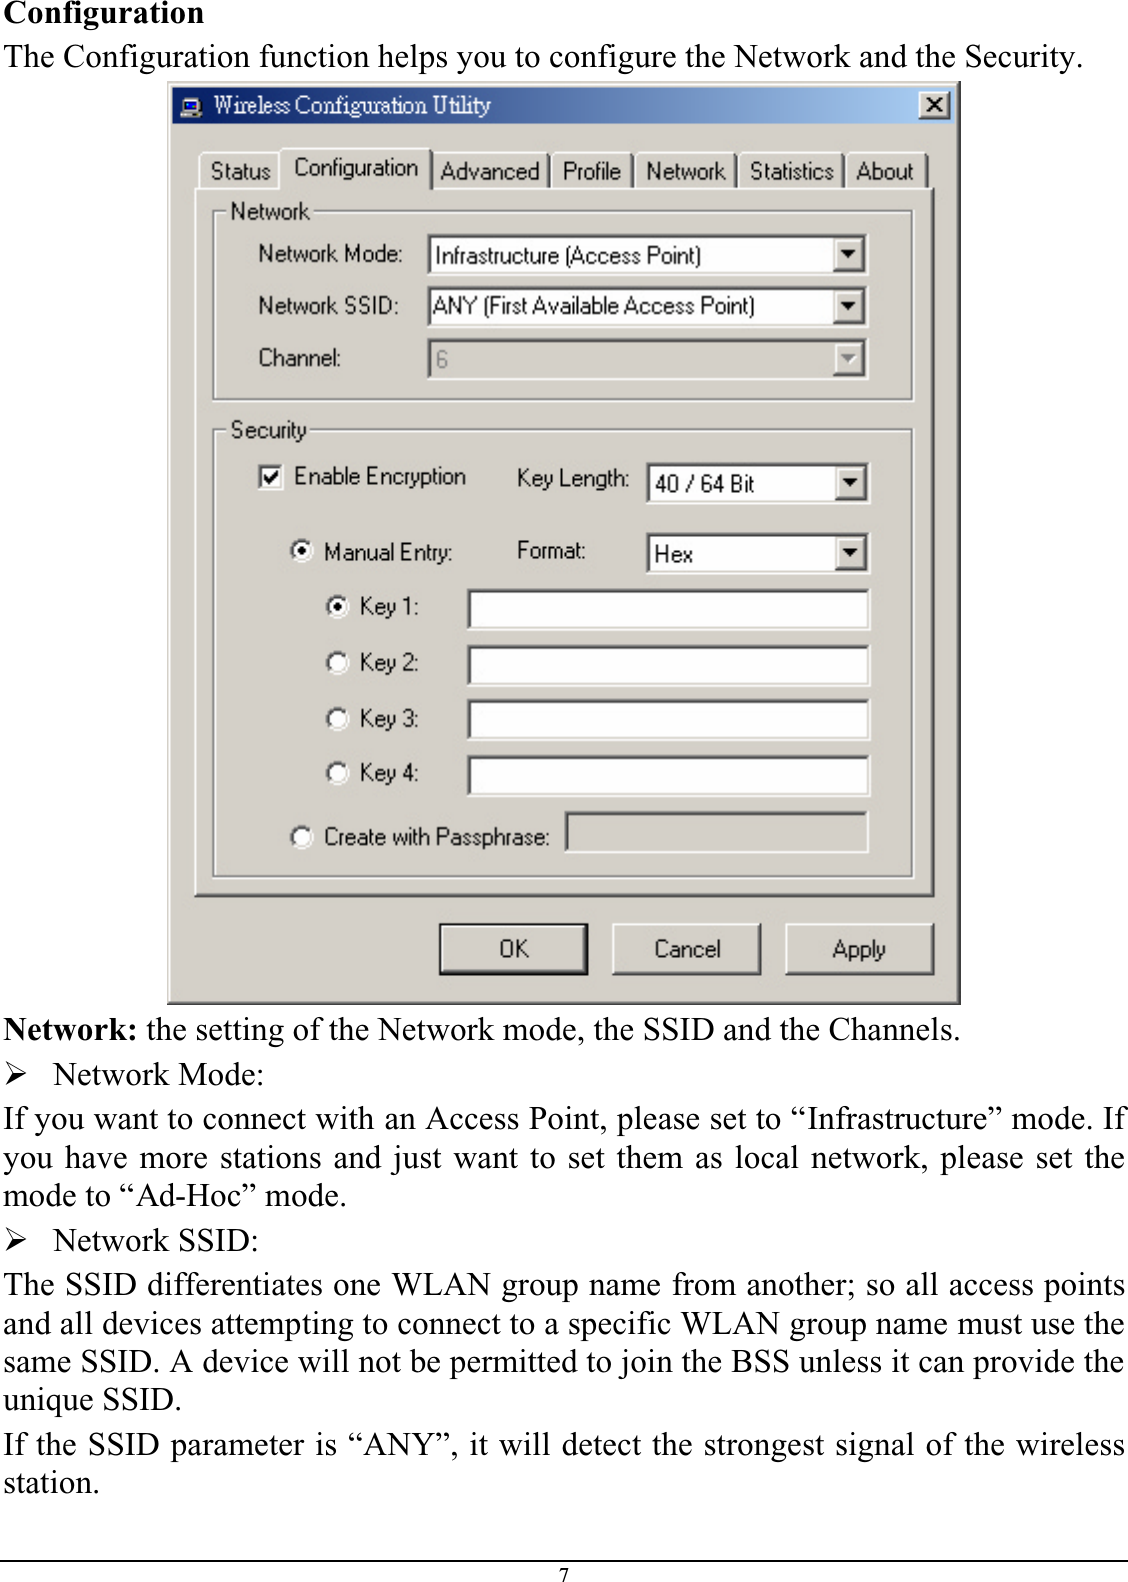 7ConfigurationThe Configuration function helps you to configure the Network and the Security.Network: the setting of the Network mode, the SSID and the Channels.¾Network Mode:If you want to connect with an Access Point, please set to “Infrastructure” mode. If you have more stations and just want to set them as local network, please set themode to “Ad-Hoc” mode.¾Network SSID:The SSID differentiates one WLAN group name from another; so all access pointsand all devices attempting to connect to a specific WLAN group name must use the same SSID. A device will not be permitted to join the BSS unless it can provide the unique SSID.If the SSID parameter is “ANY”, it will detect the strongest signal of the wirelessstation.